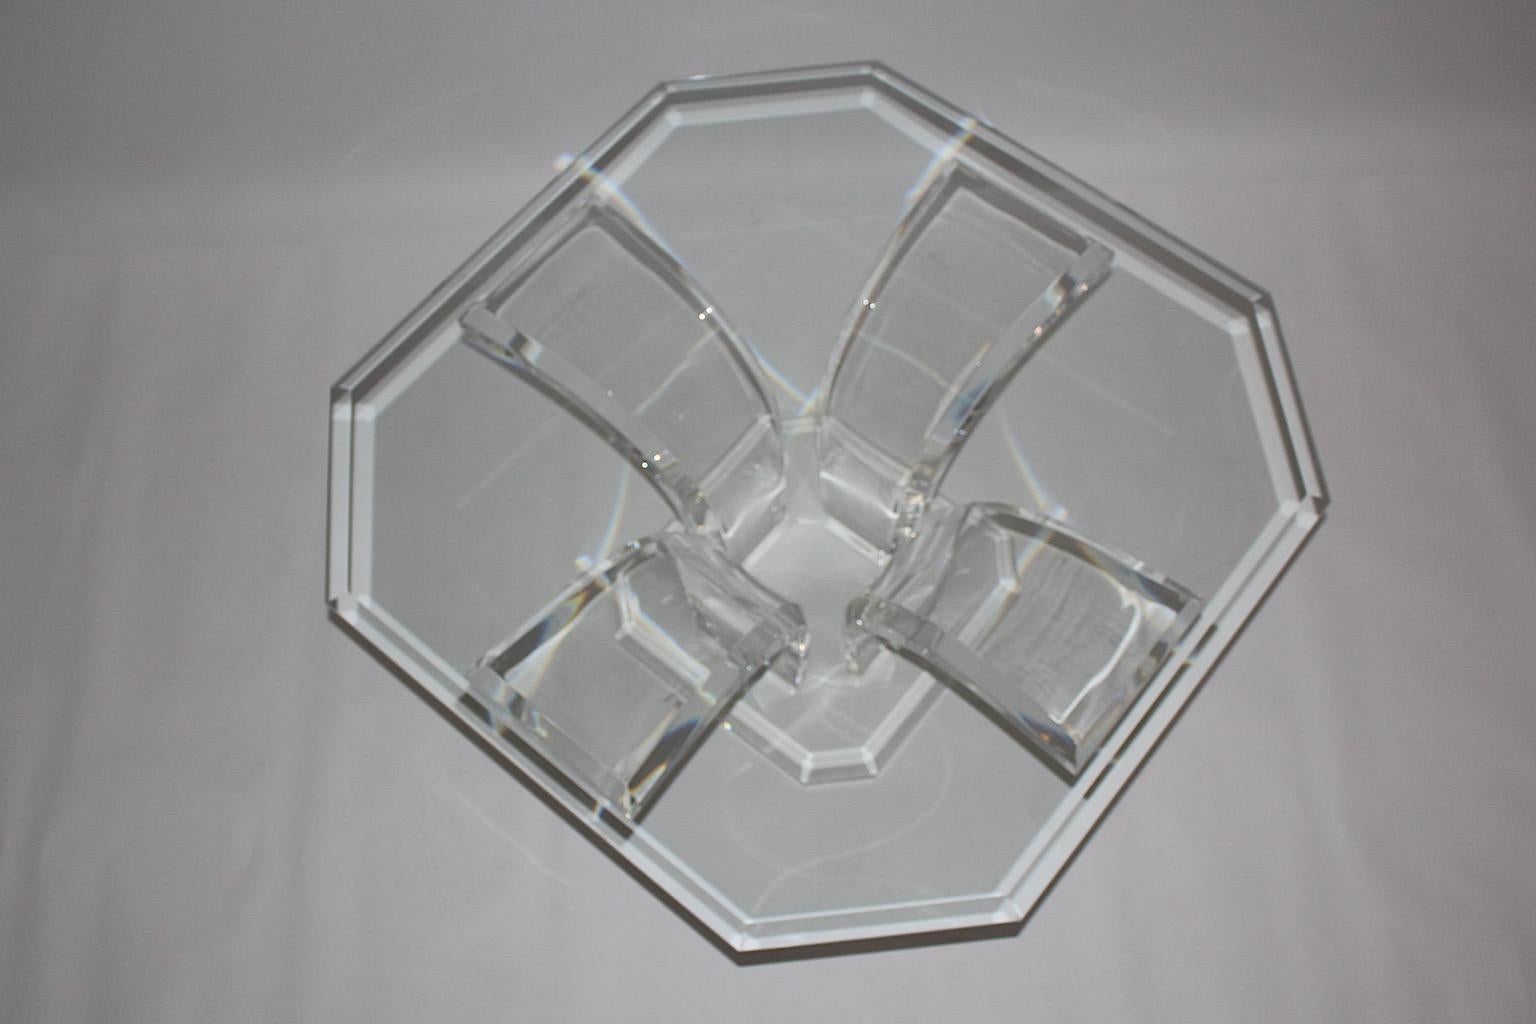 Space Age Vintage Rectangular Transparent Lucite Glass Coffee Table circa 1970 For Sale 1